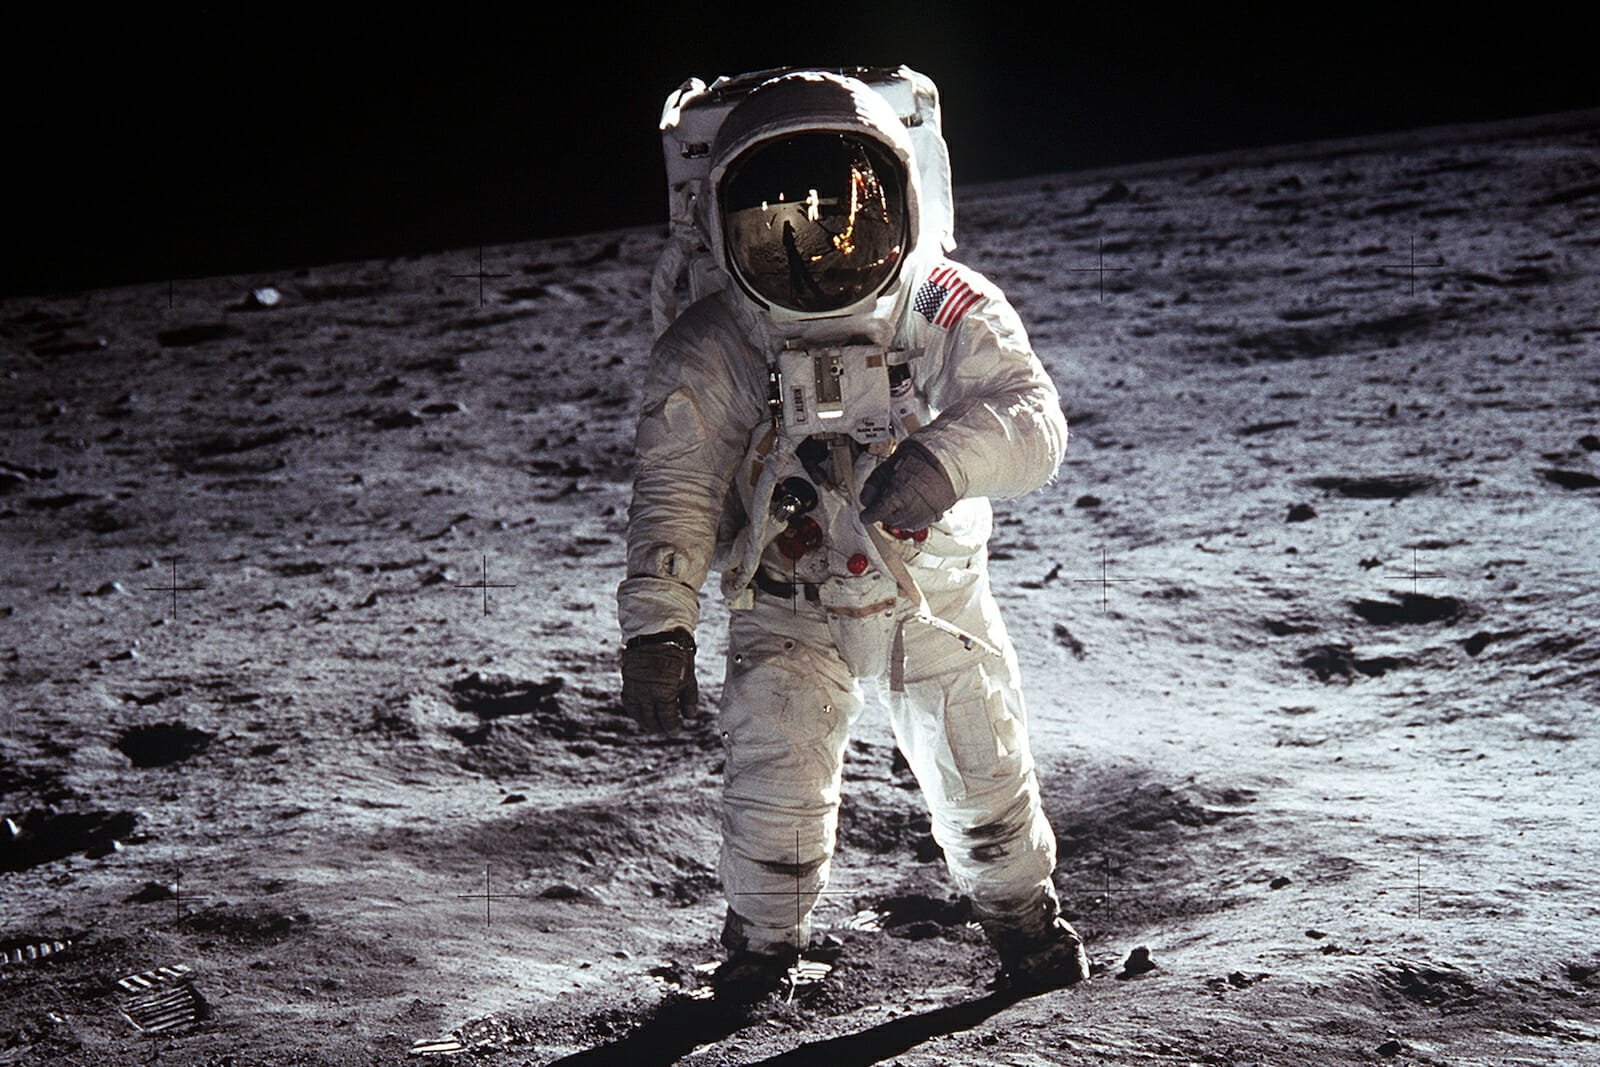 Remembering the Man on the Moon: The Passing of Neil Armstrong